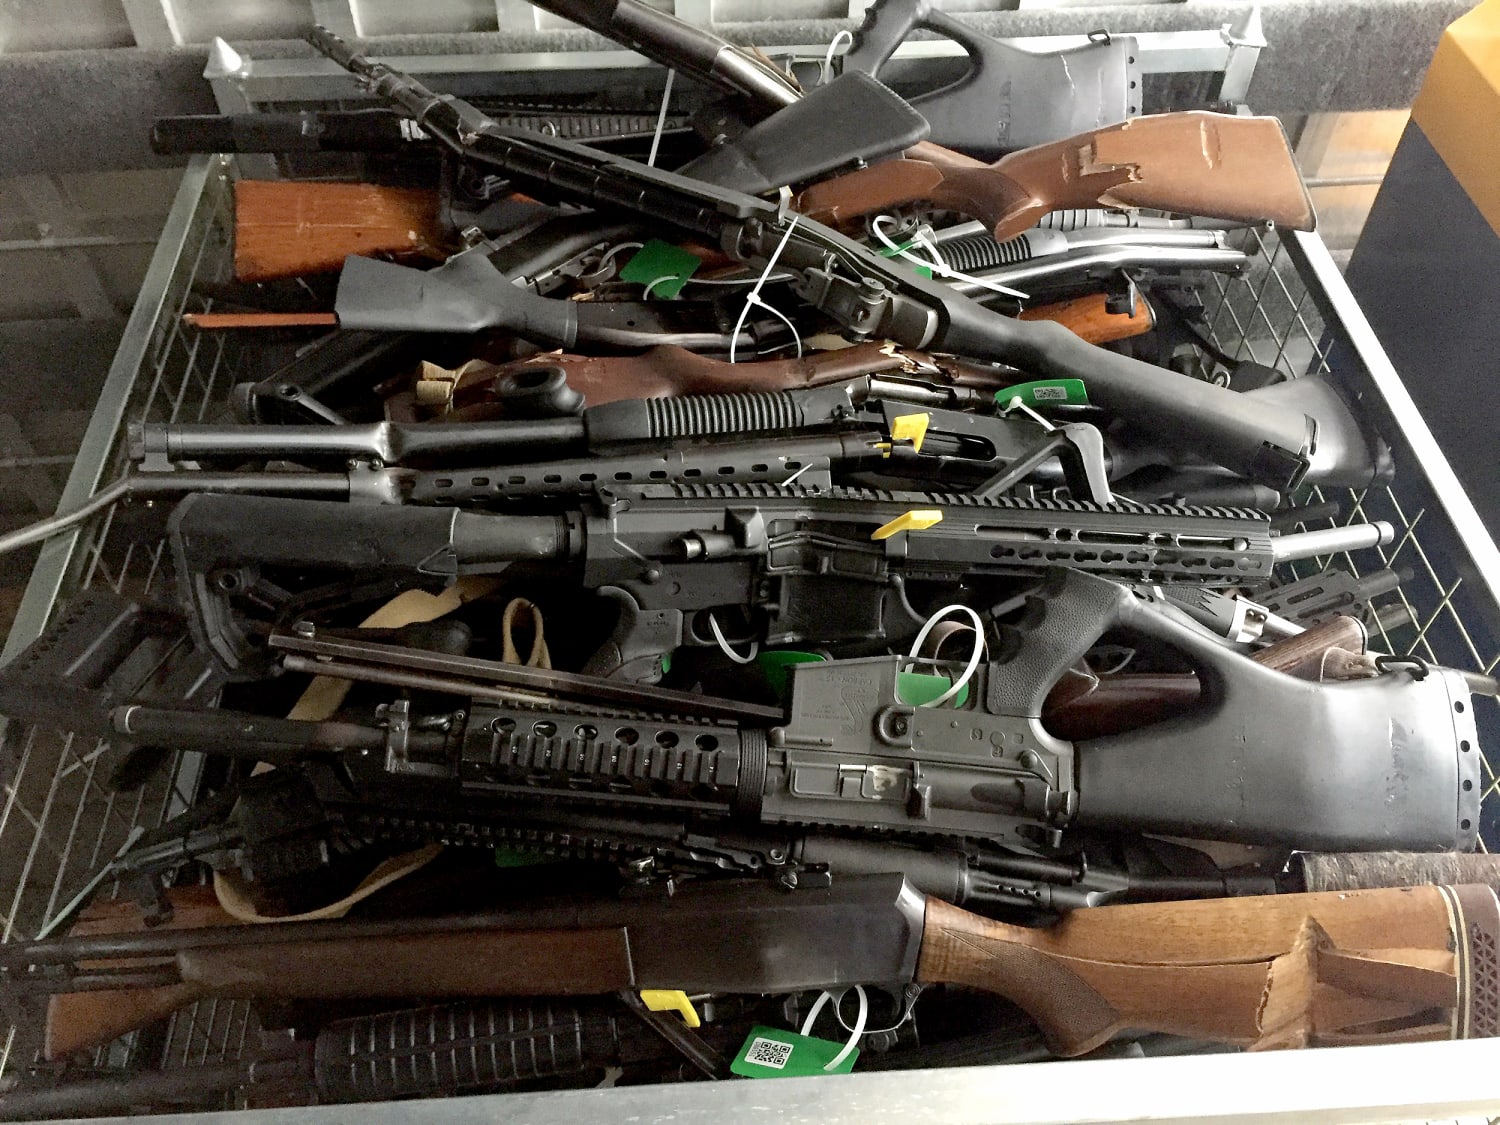 More than 450 Guns Collected at Gun Buyback Event - The Silicon Valley Voice